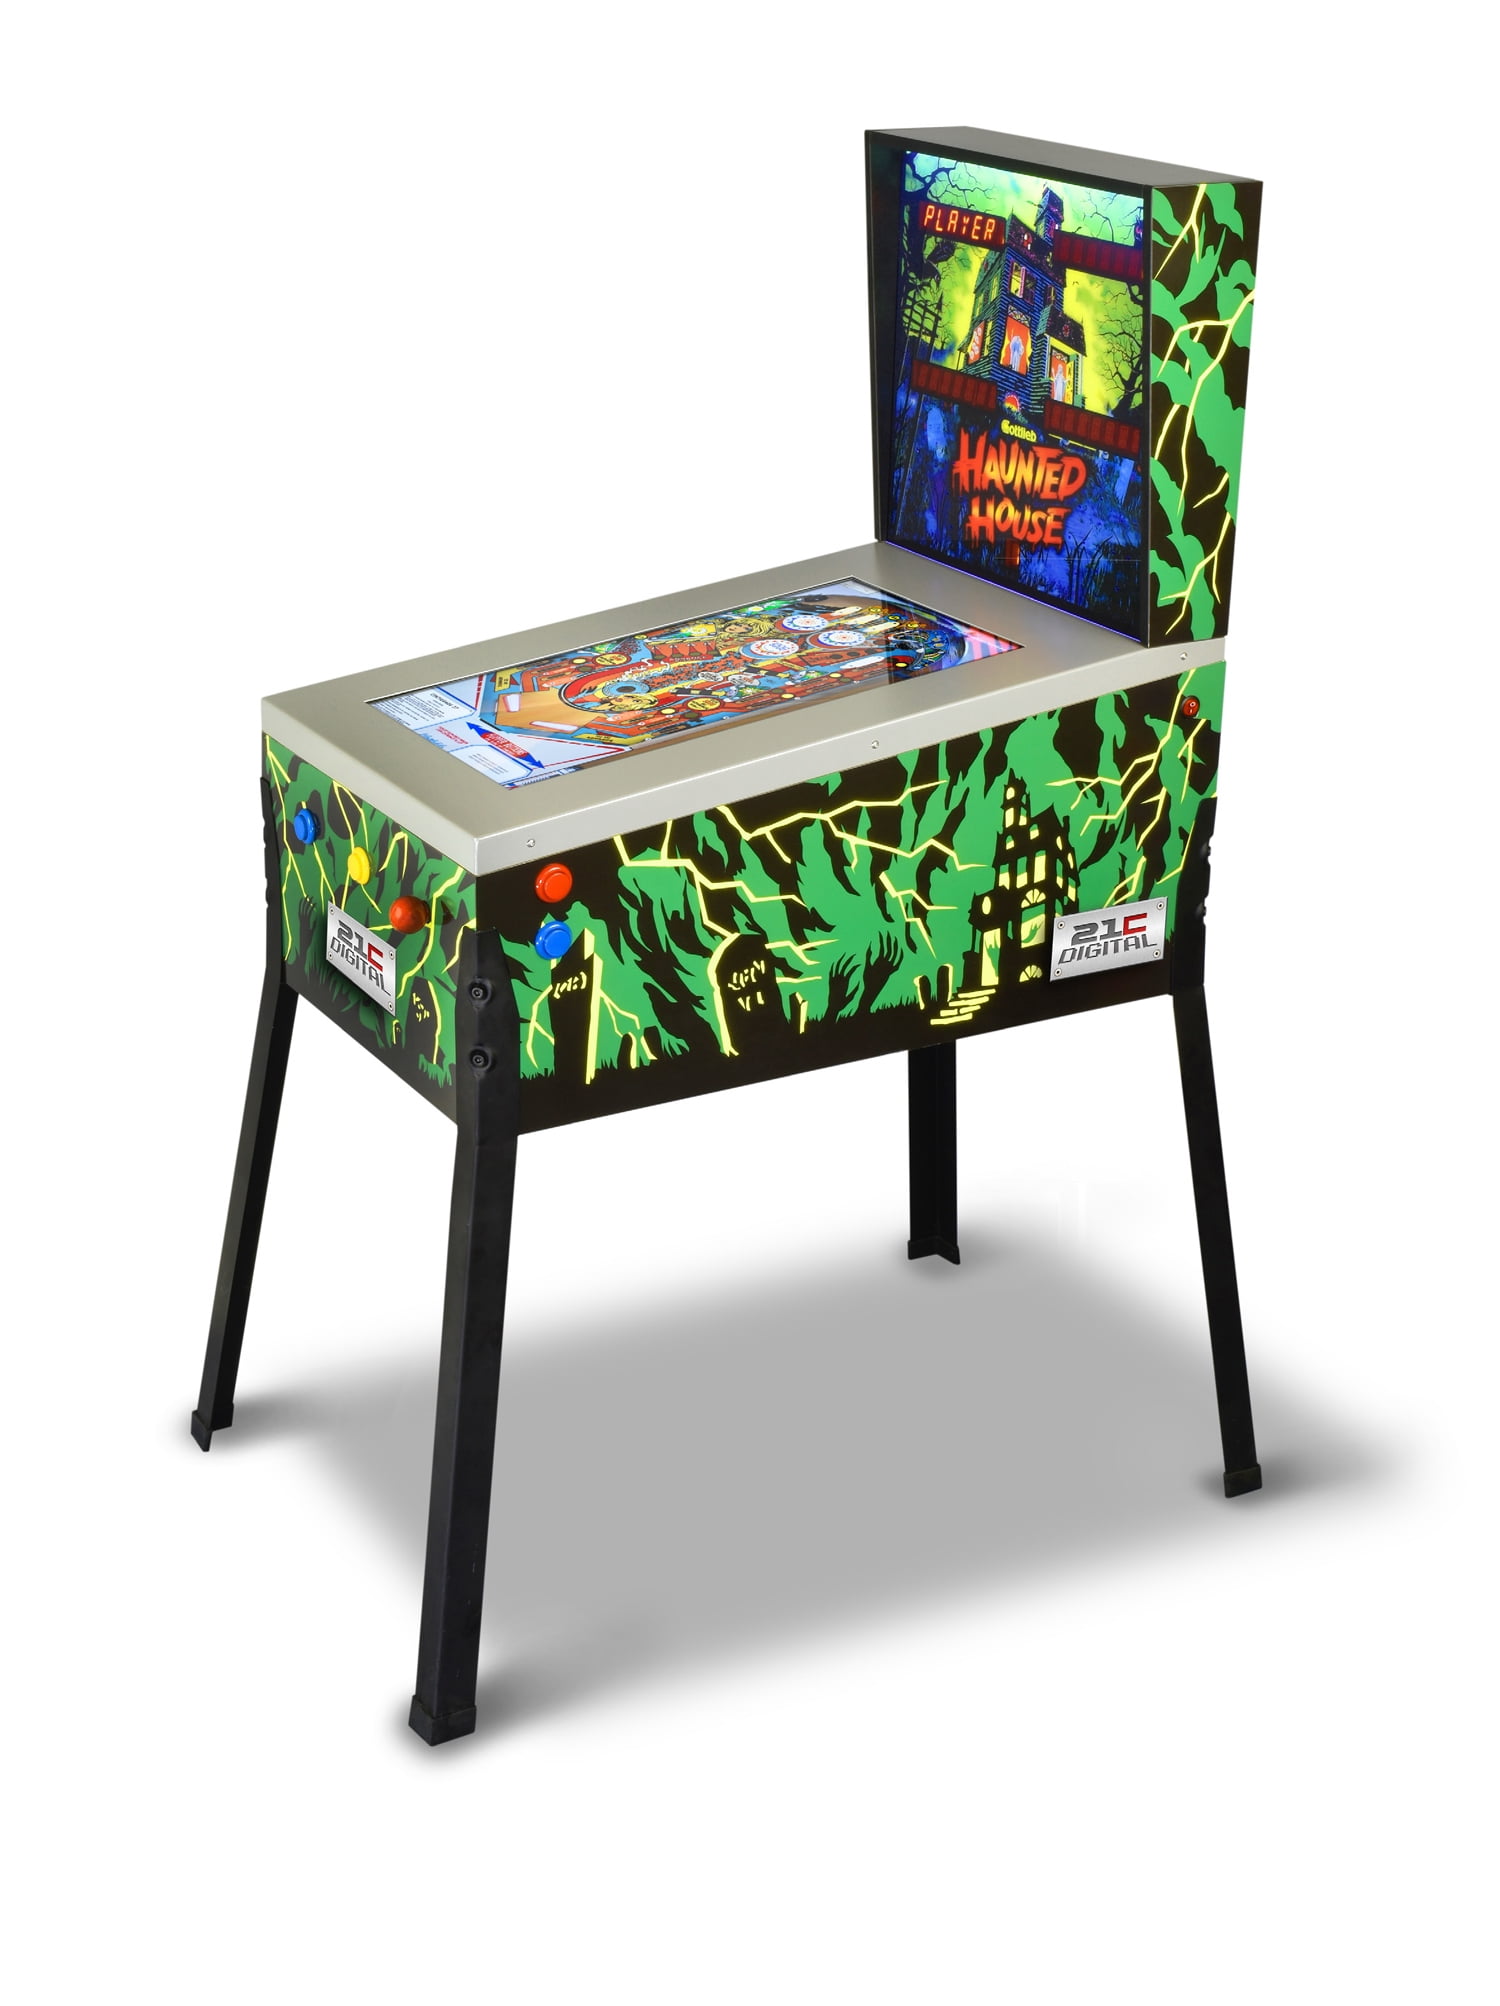 New Fantastic Electronic Pinball Machine With Sounds Comes in 3 Different Desigs 